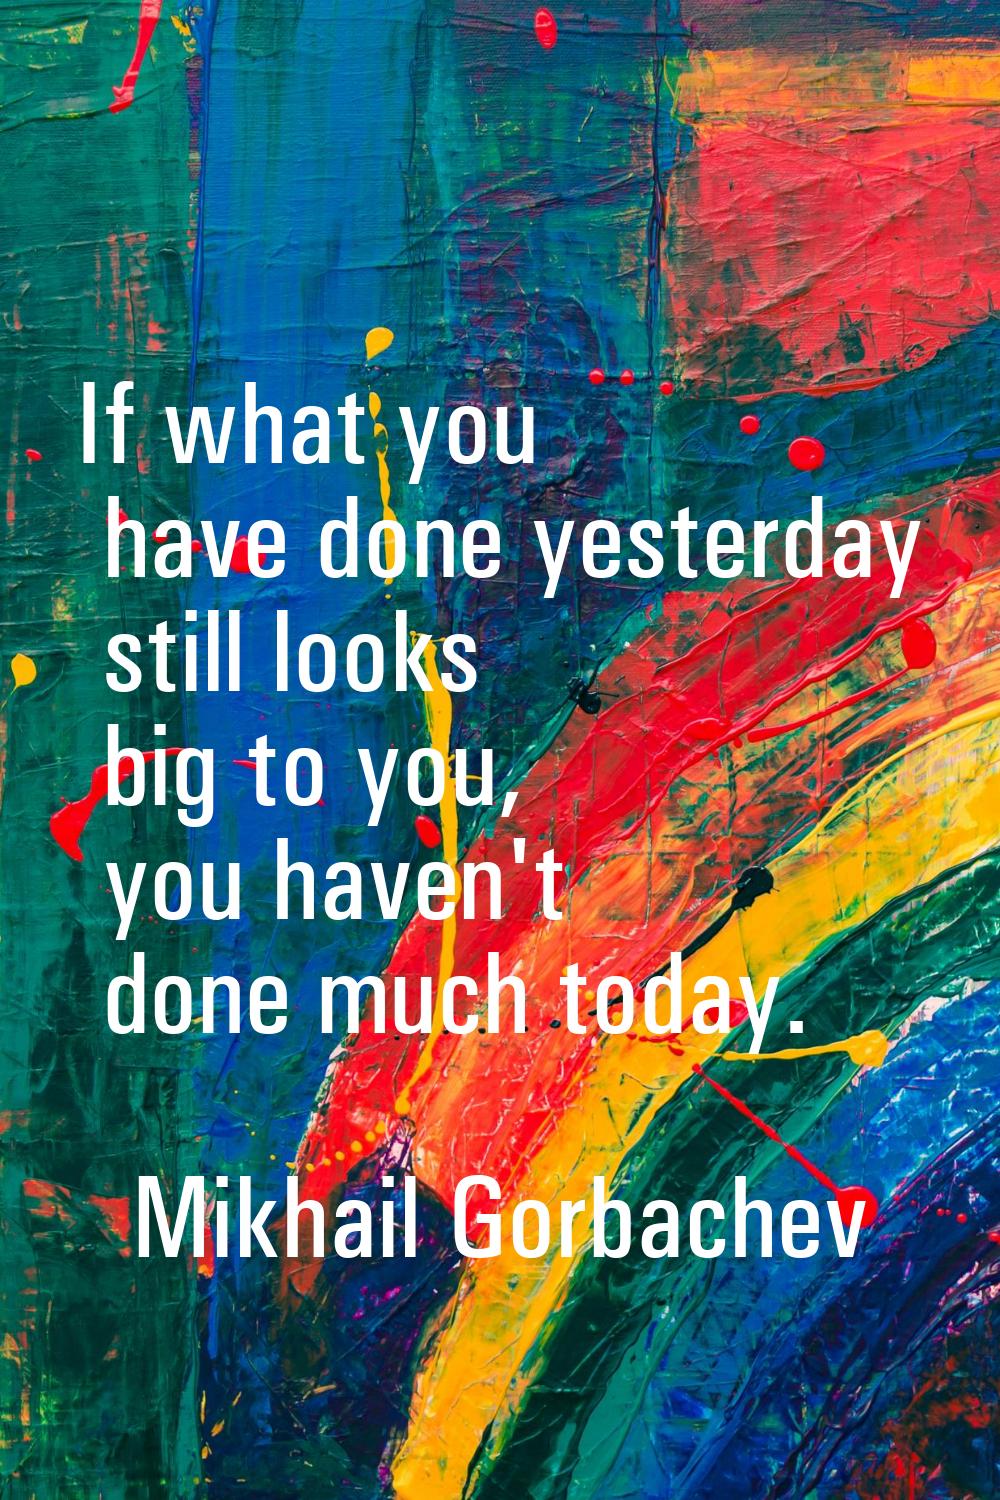 If what you have done yesterday still looks big to you, you haven't done much today.